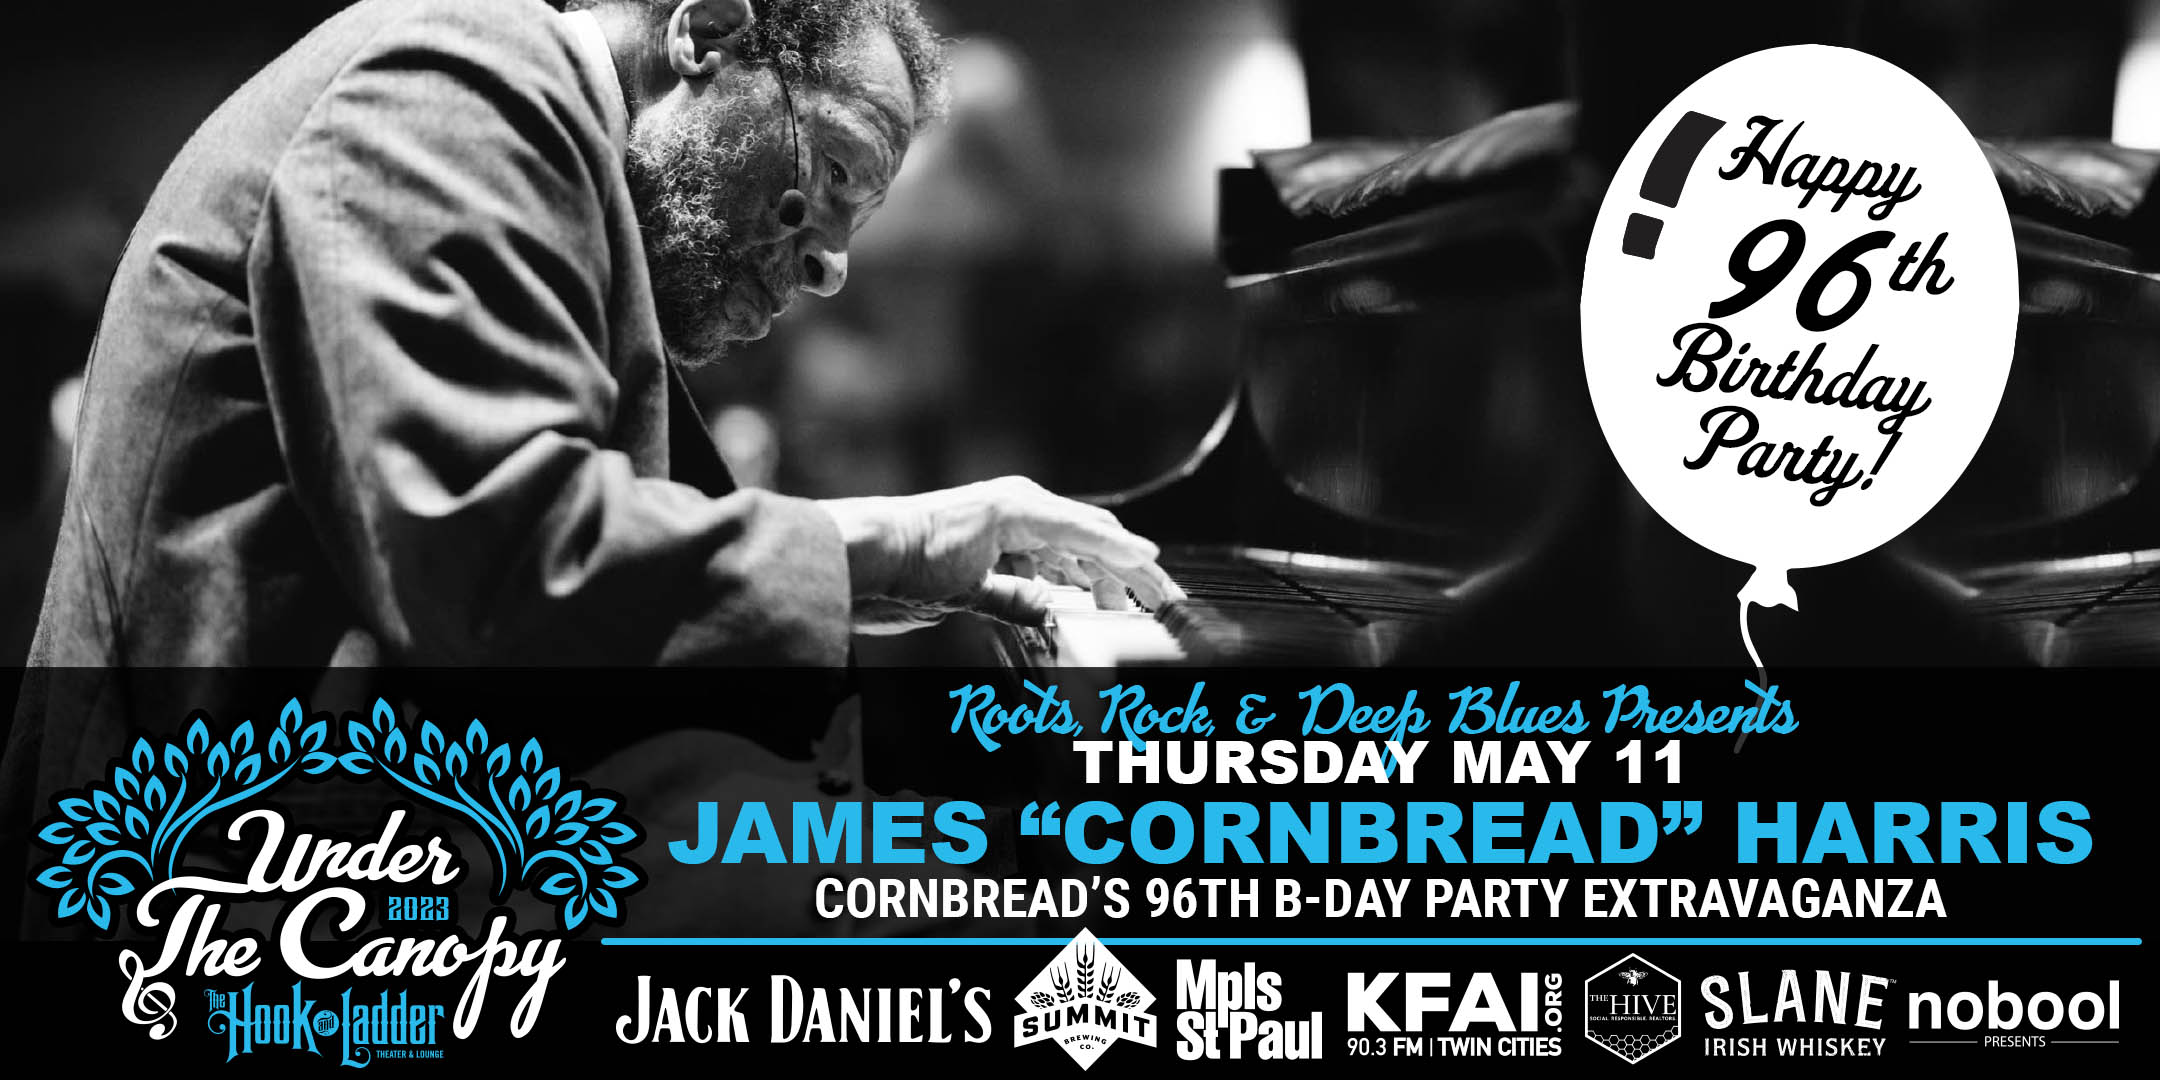 Roots, Rock, Deep Blues Presents James Samuel "Cornbread" Harris Sr. Cornbread's 96th B-Day Party Extravaganza Thursday, May 11 Under The Canopy at The Hook and Ladder Theater "An Urban Outdoor Summer Concert Series" Doors 6:00pm :: Music 7:00pm :: 21+ Reserved Seats: $25 GA: $20 ADV / $25 DOS